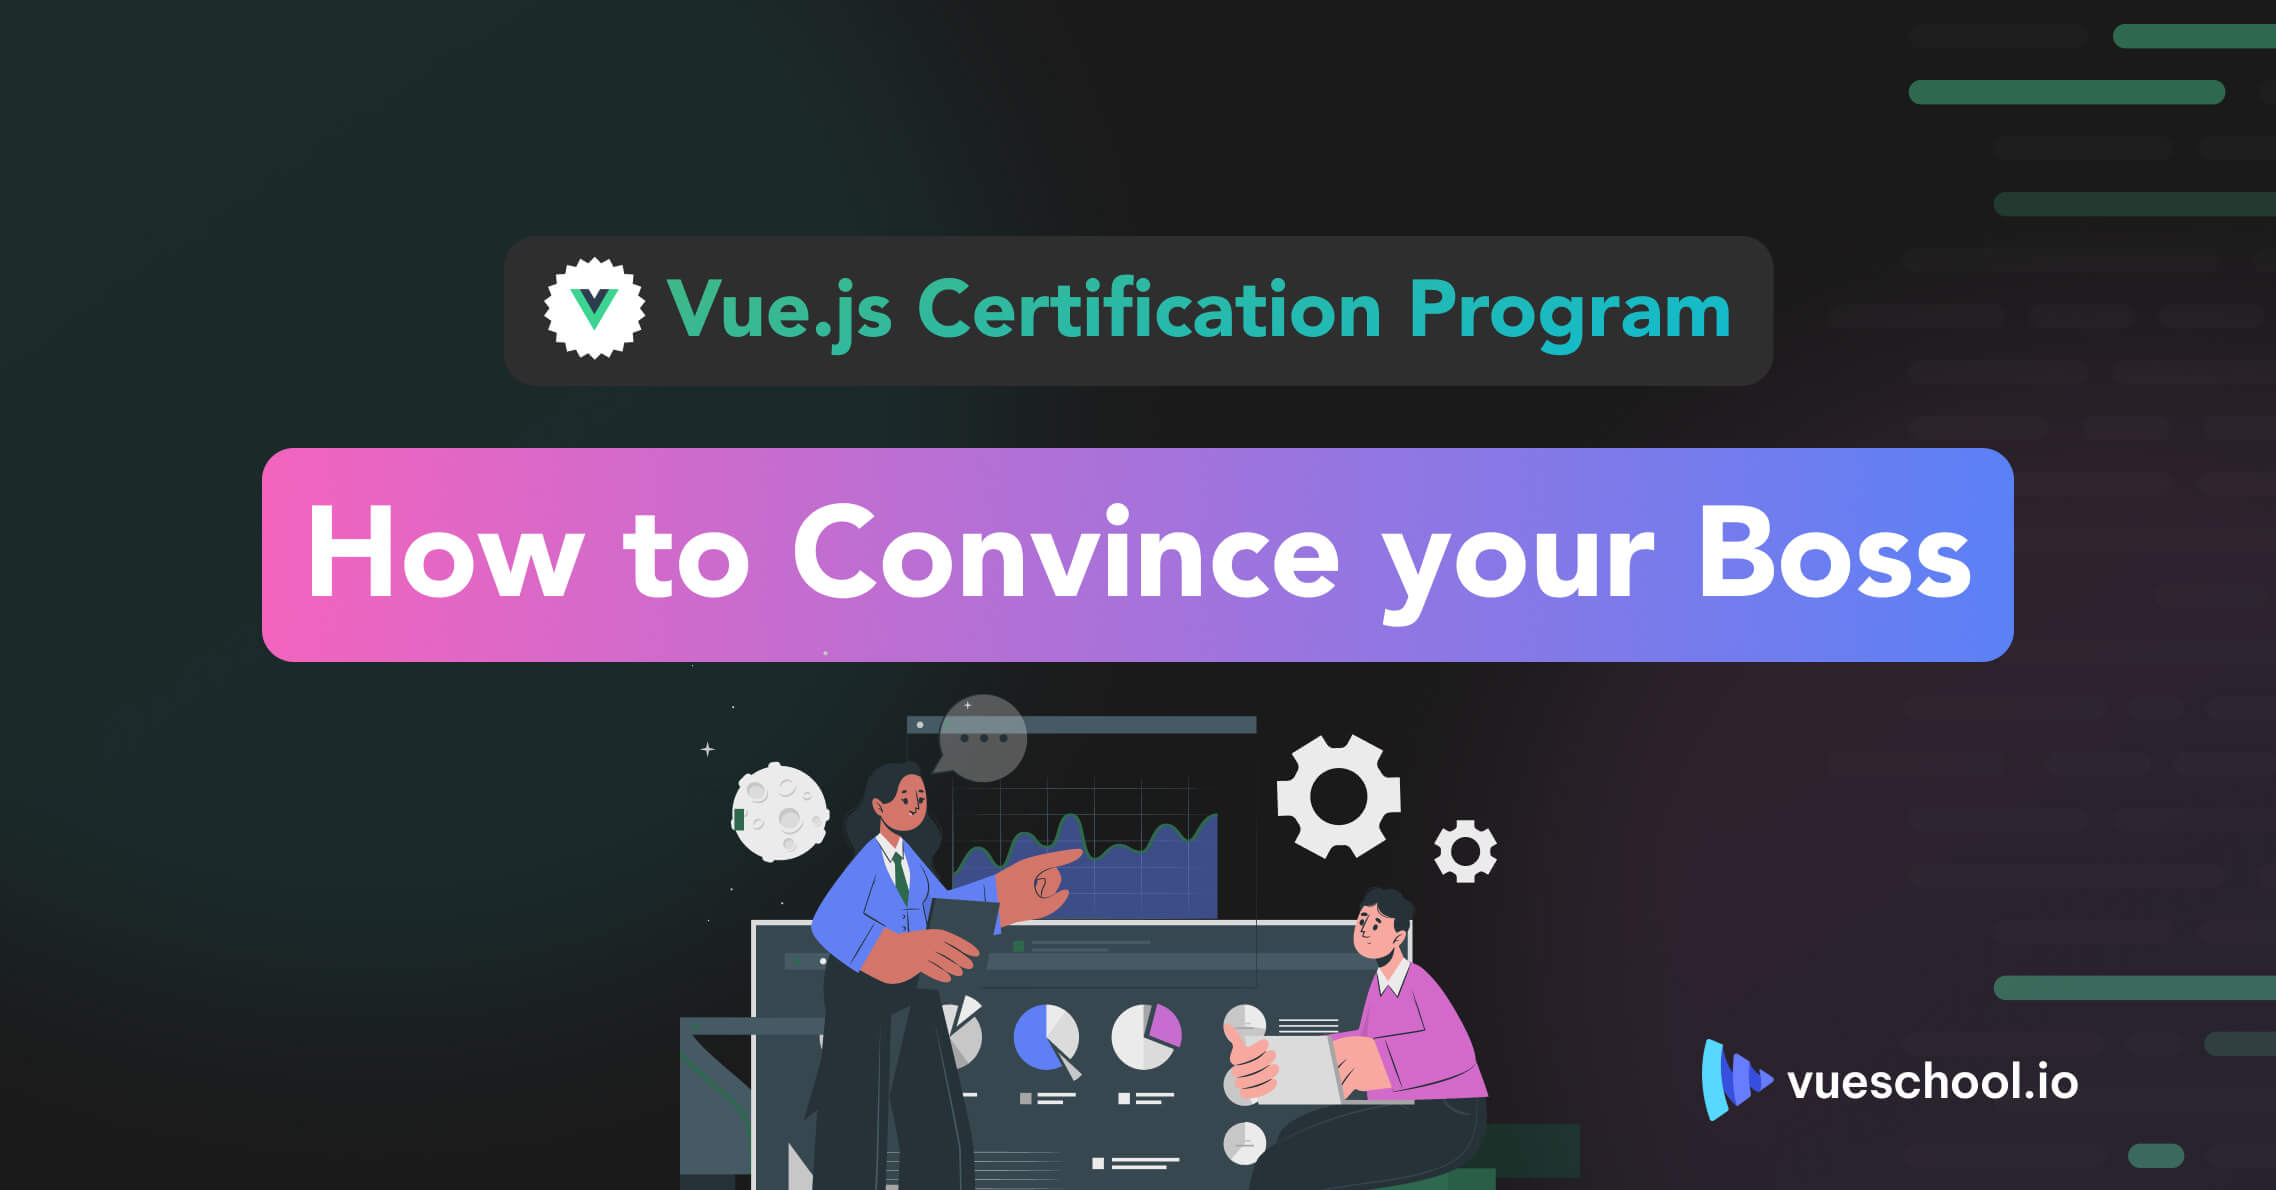 How to convince your boss to get you Vue.js Certified